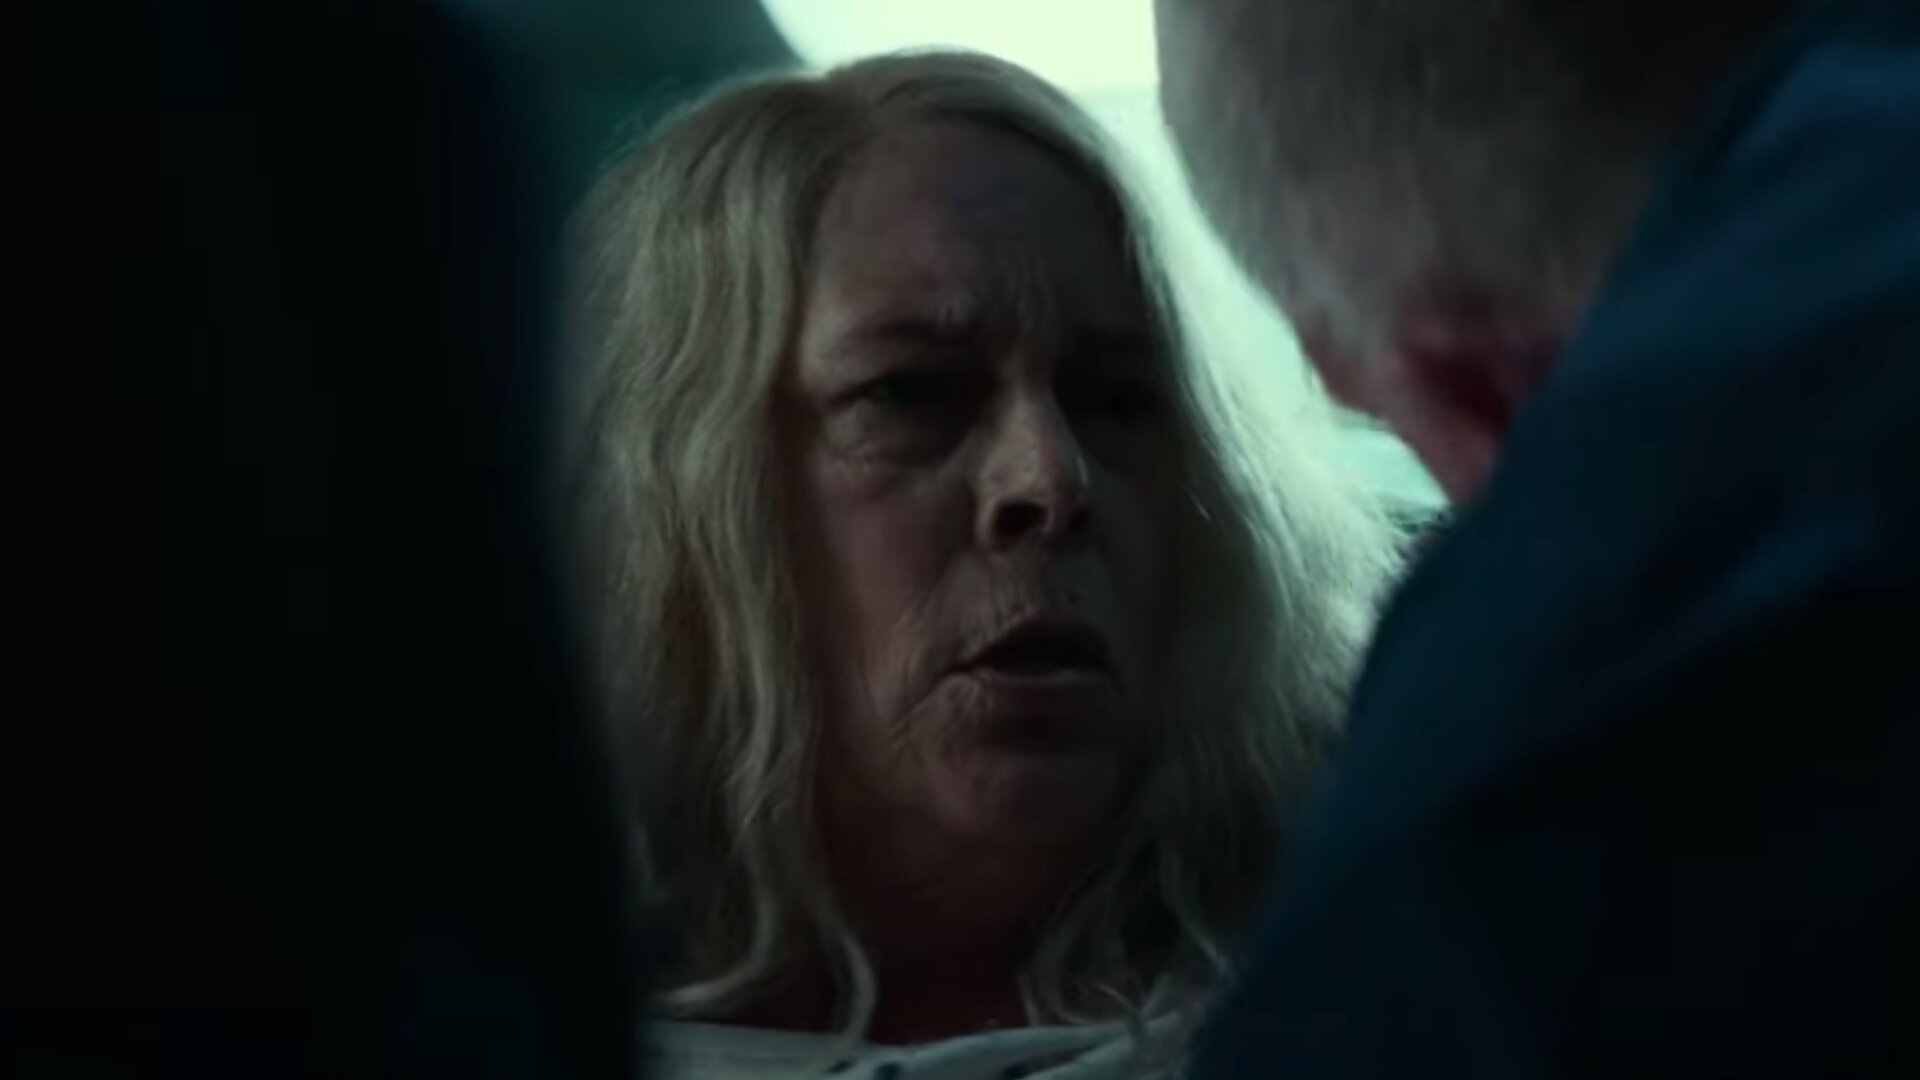 Three New Clips for HALLOWEEN KILLS, One Featuring Laurie Strode and Tommy Doyle Reuniting